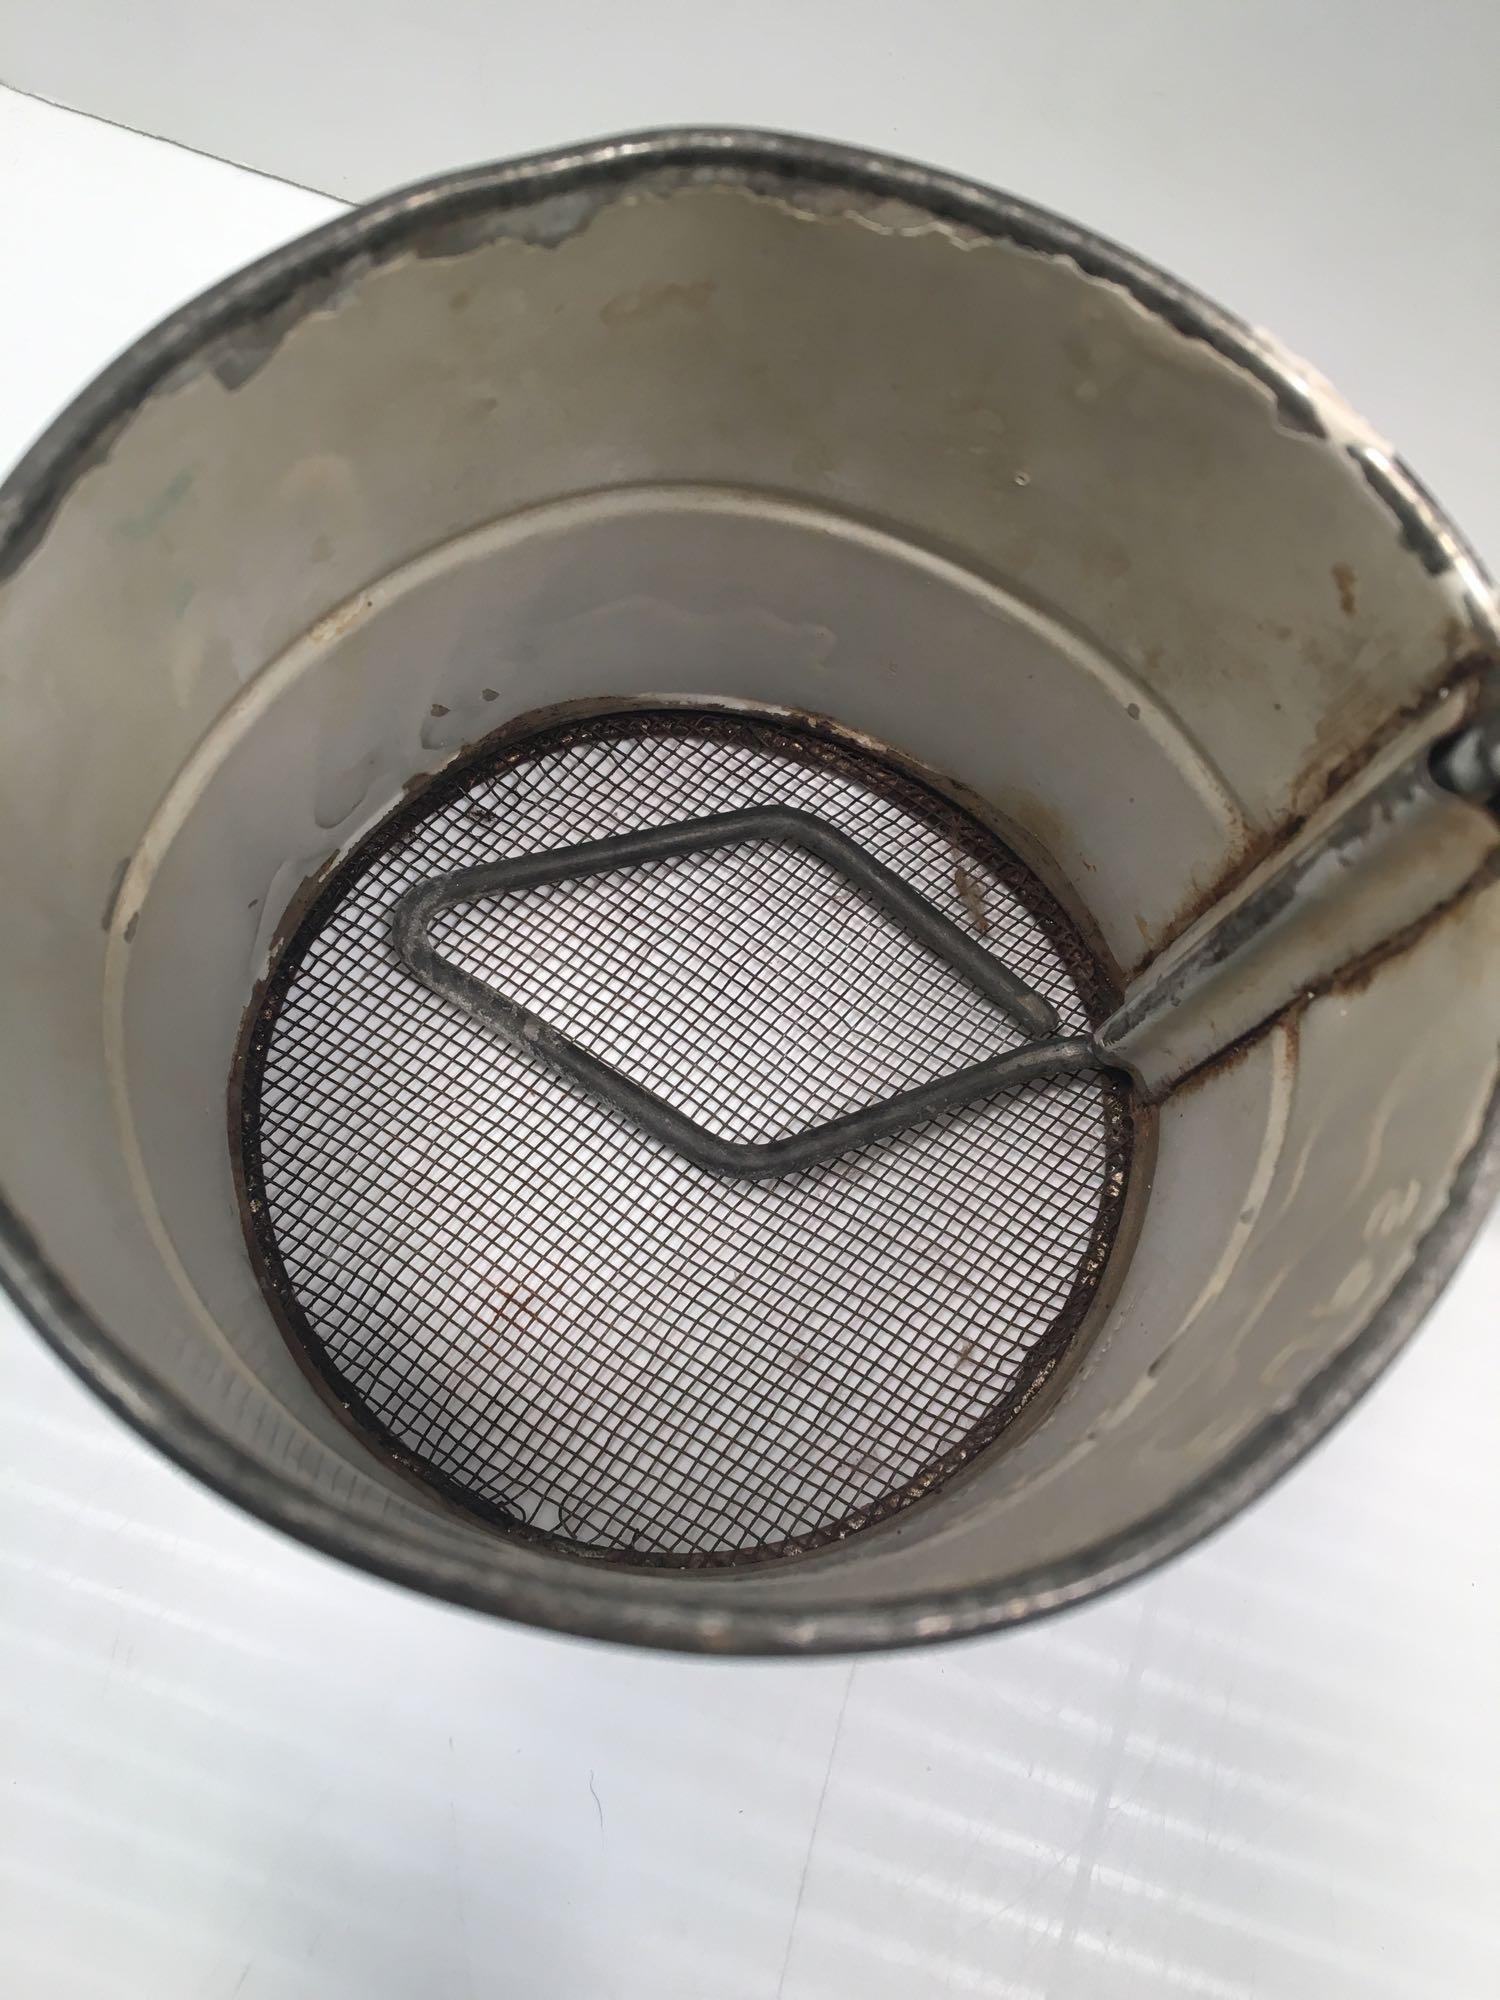 Erickson 2 cup side to side sifter, vintage sifter, strainers, more